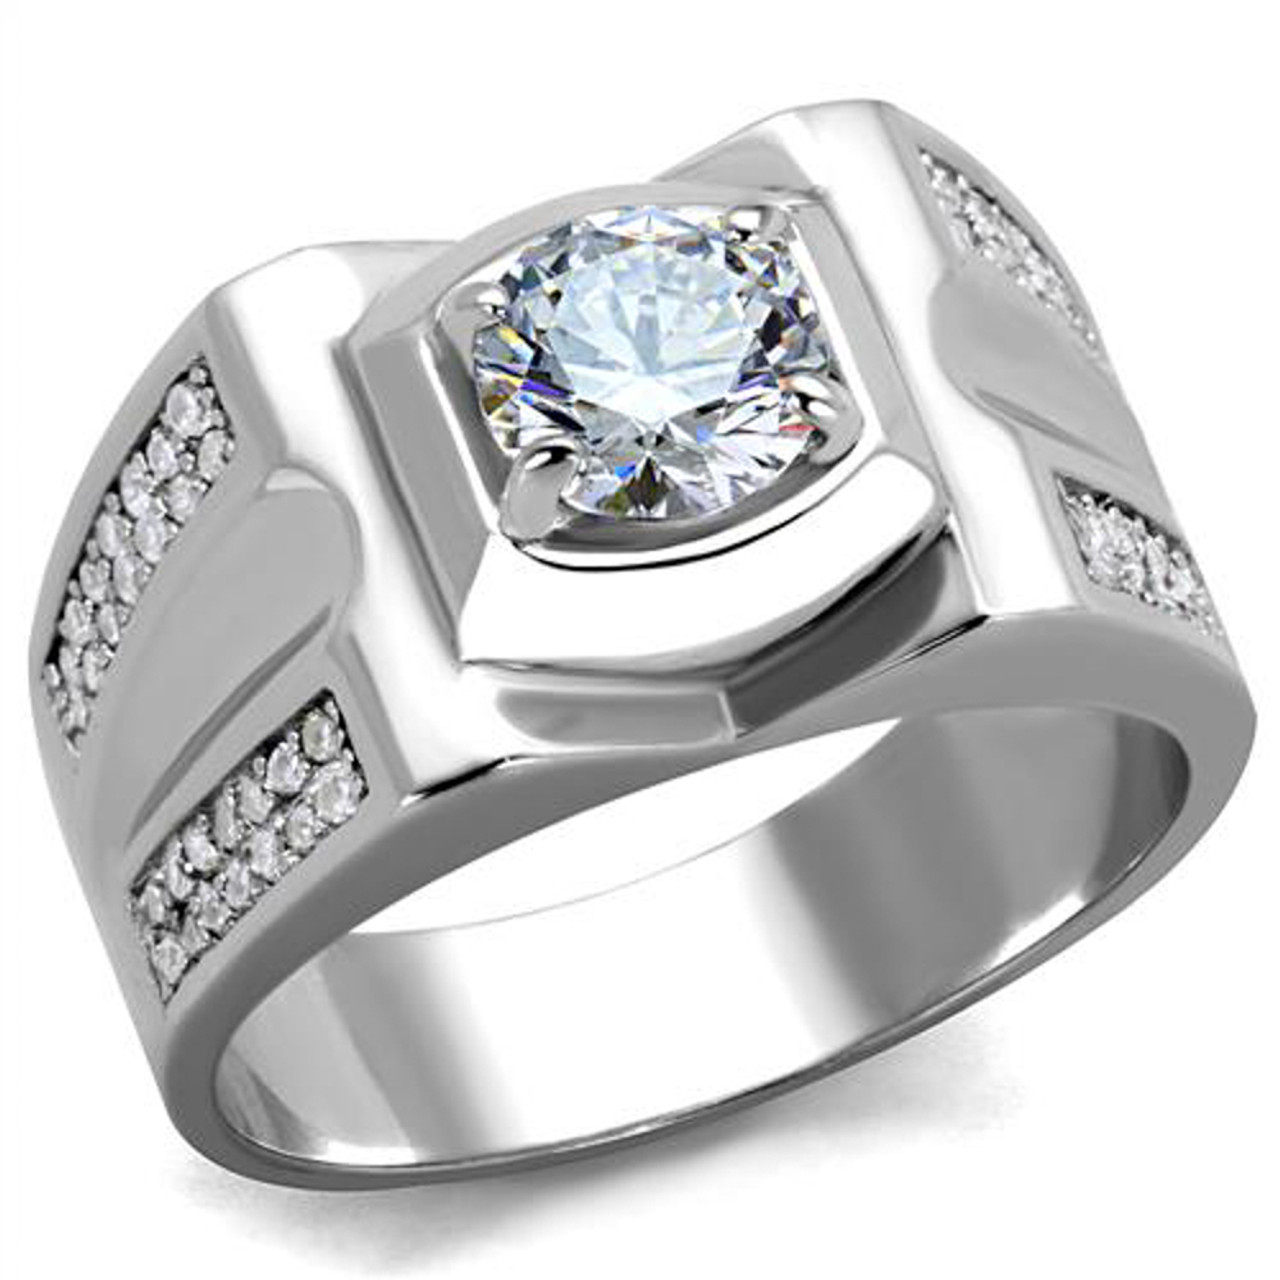 ARTS385 Men's 1 Ct Round Cut Simulated Diamond 925 Sterling Silver ...